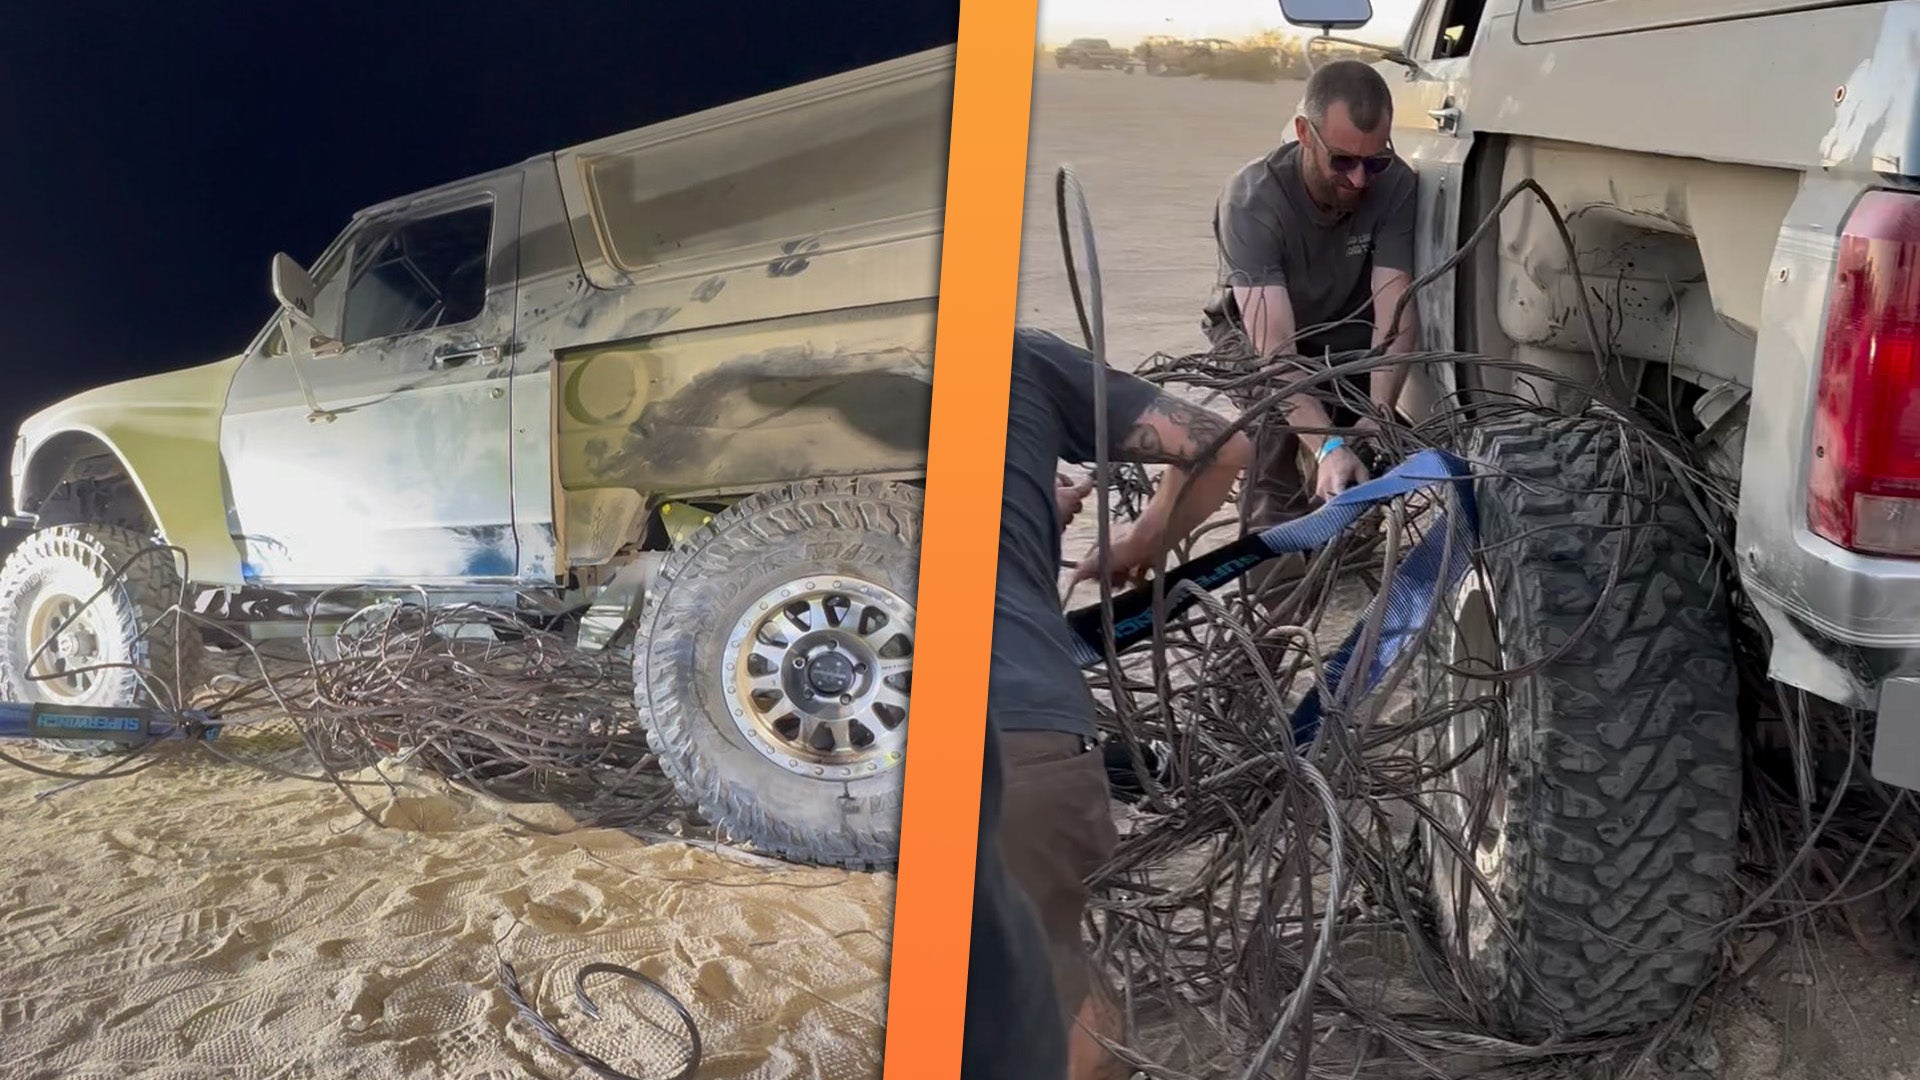 A Ford Bronco caught in a jumble of cables serves as a cautionary example of the hazards of desert littering.